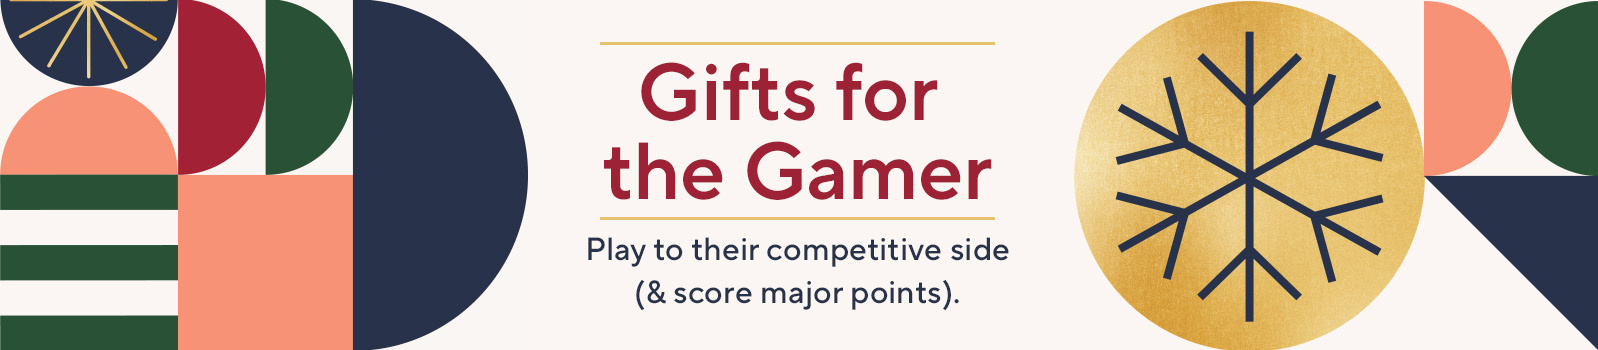 Gifts for the Gamer. Play to their competitive side (& score major points). 